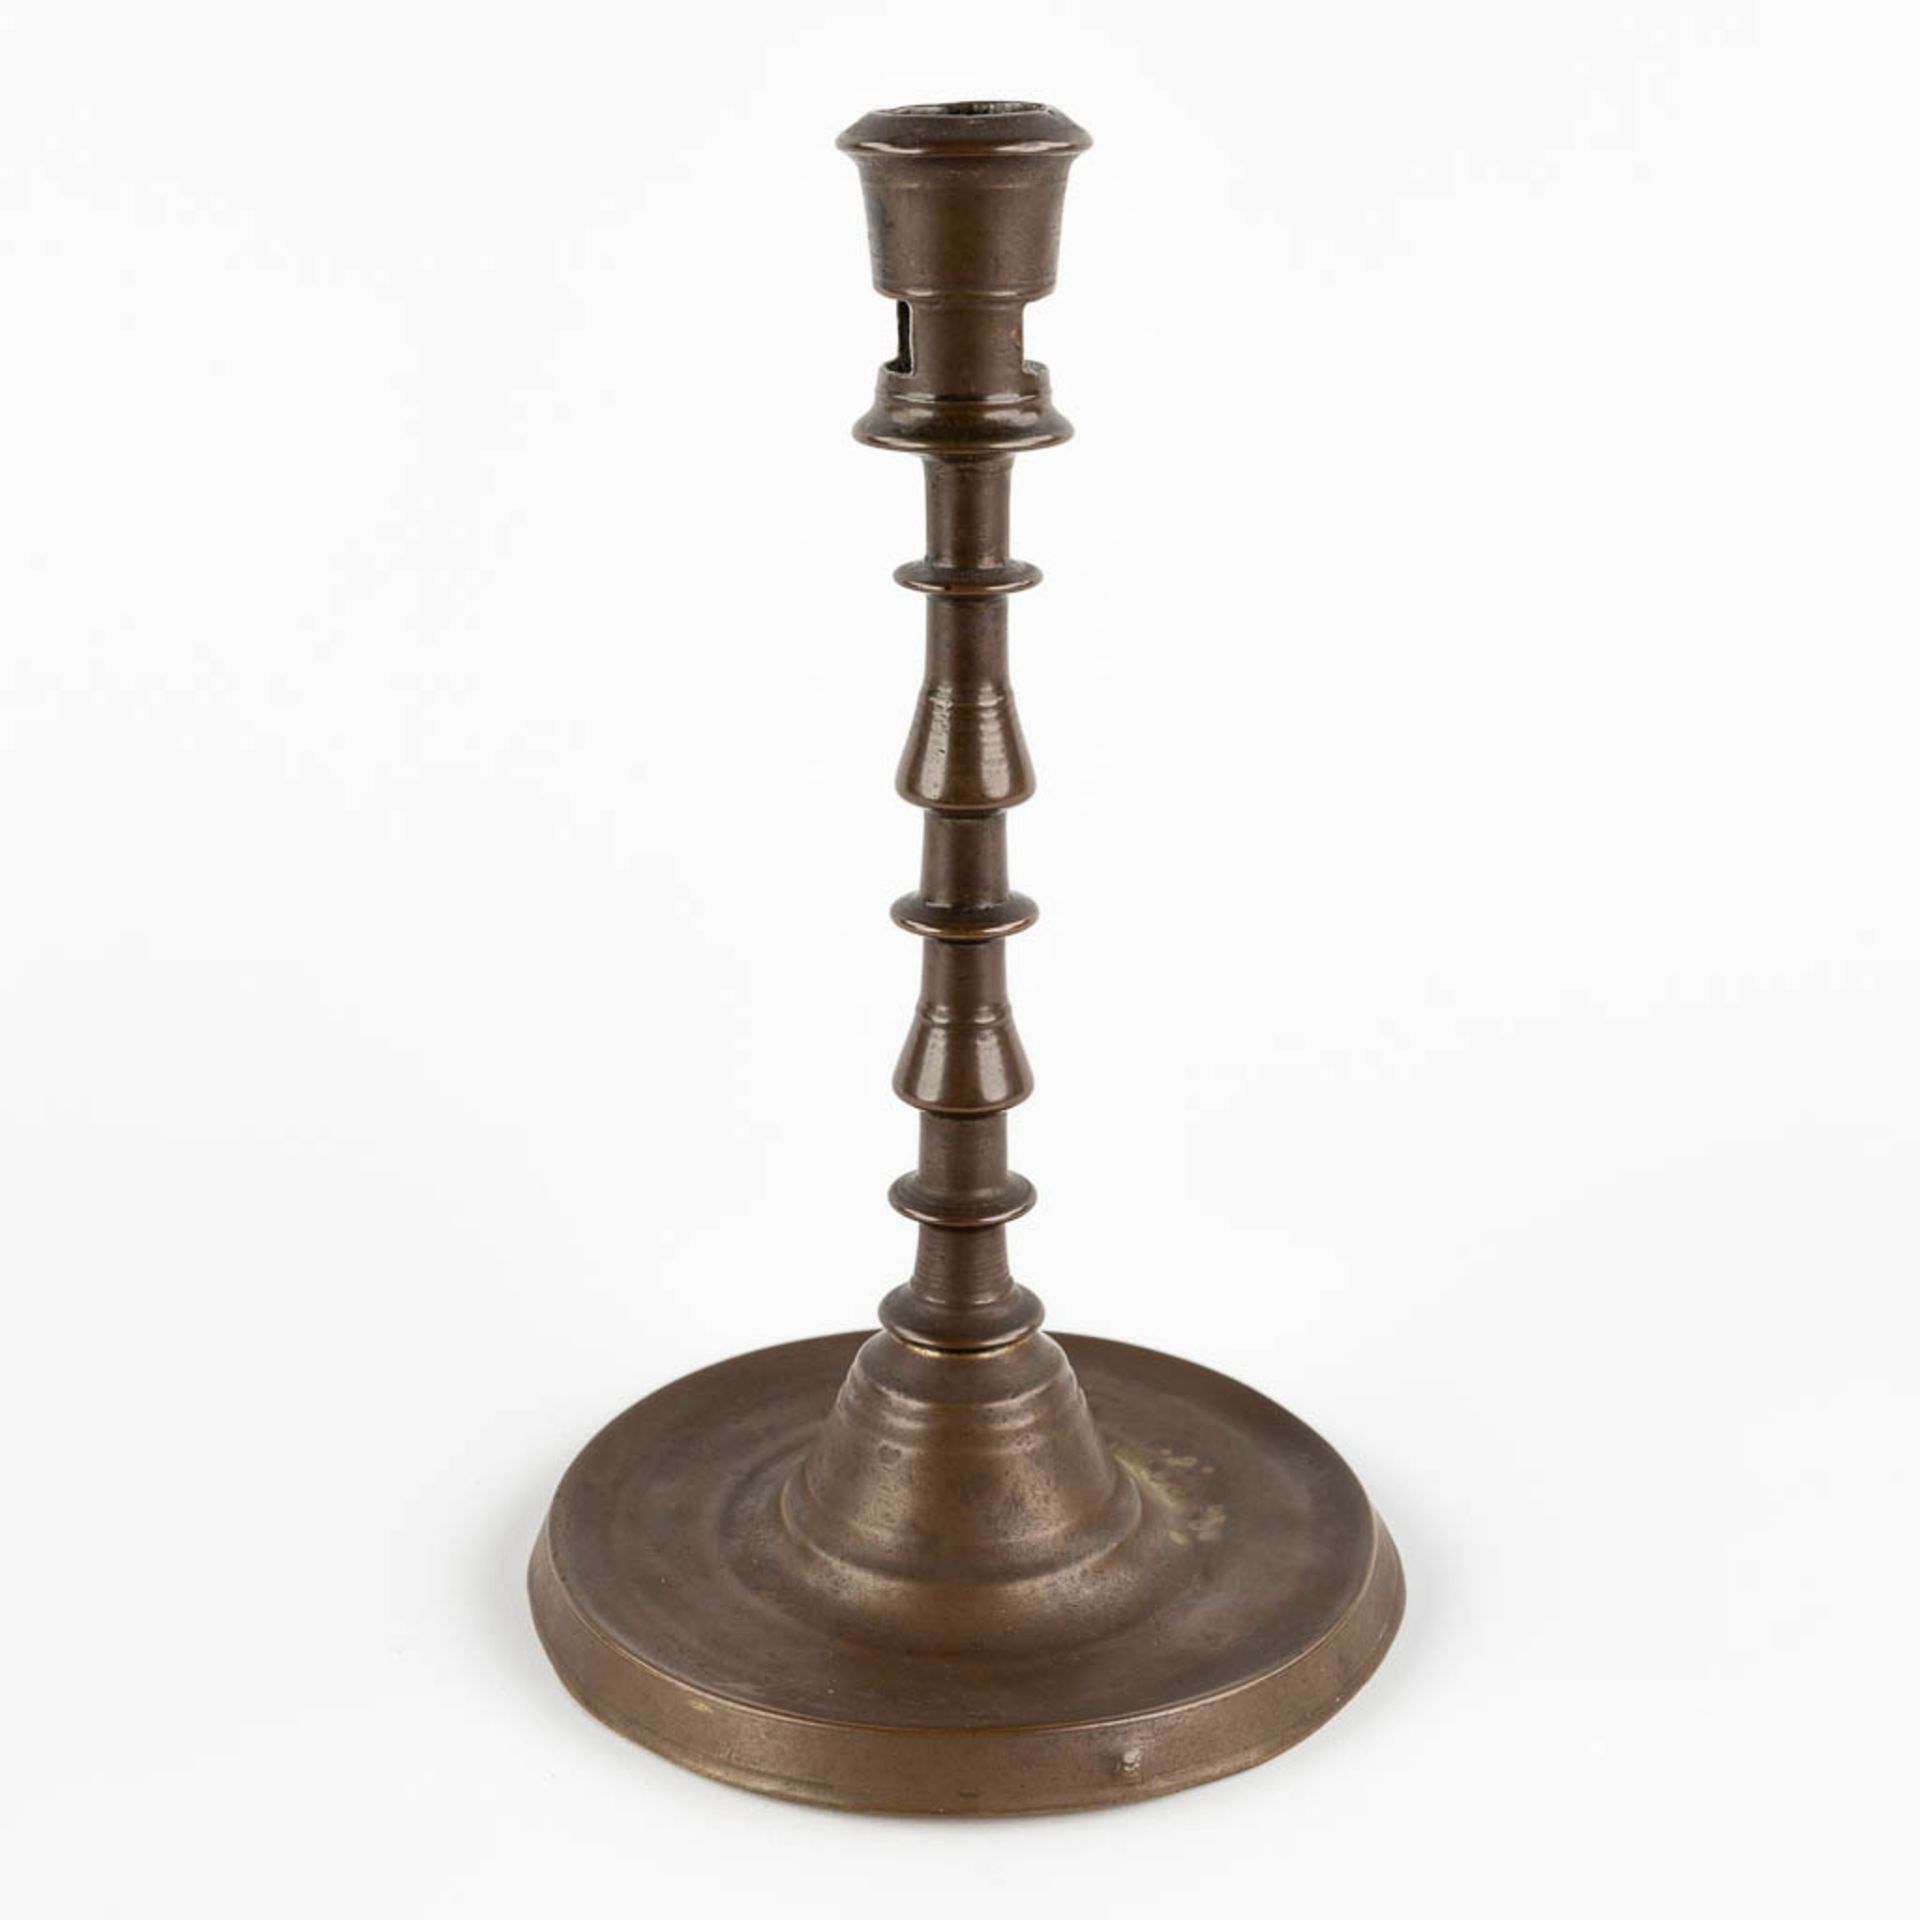 An antique candlestick, Flanders or The Netherlands, 16th C. (H:24,5 x D:14,5 cm) - Image 5 of 11